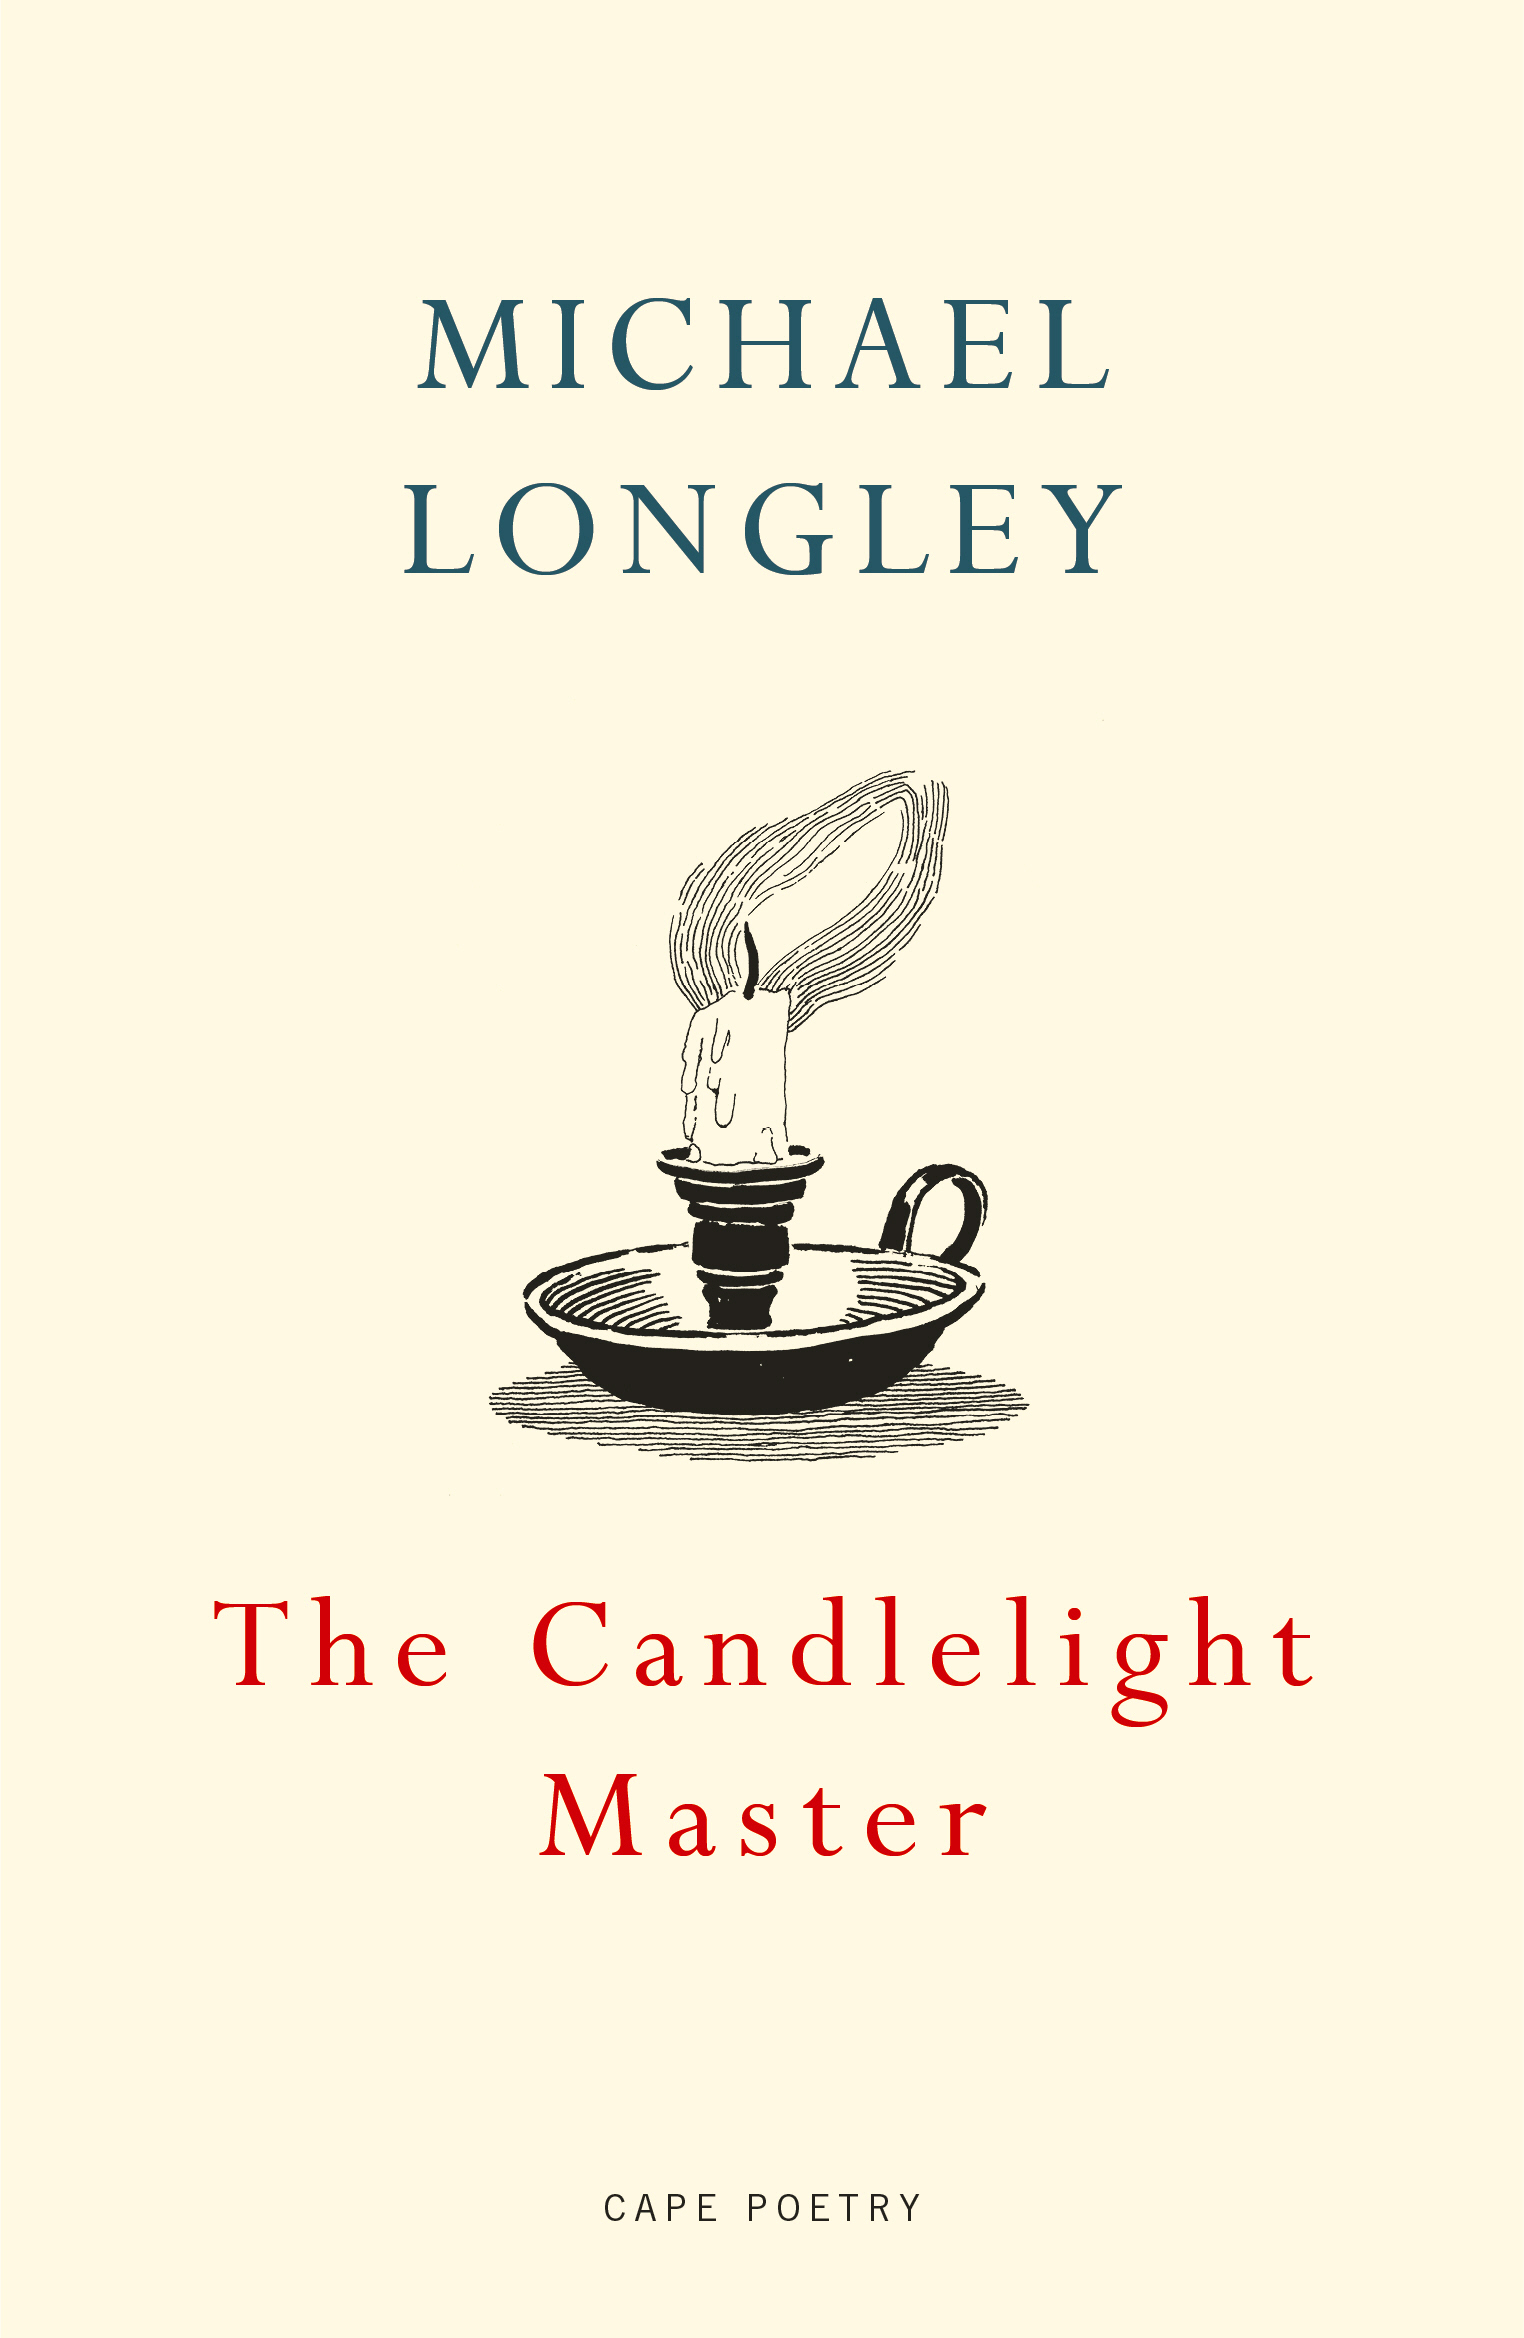 Pre-reading and re-reading Michael Longley’s ‘The Candlelight Master’